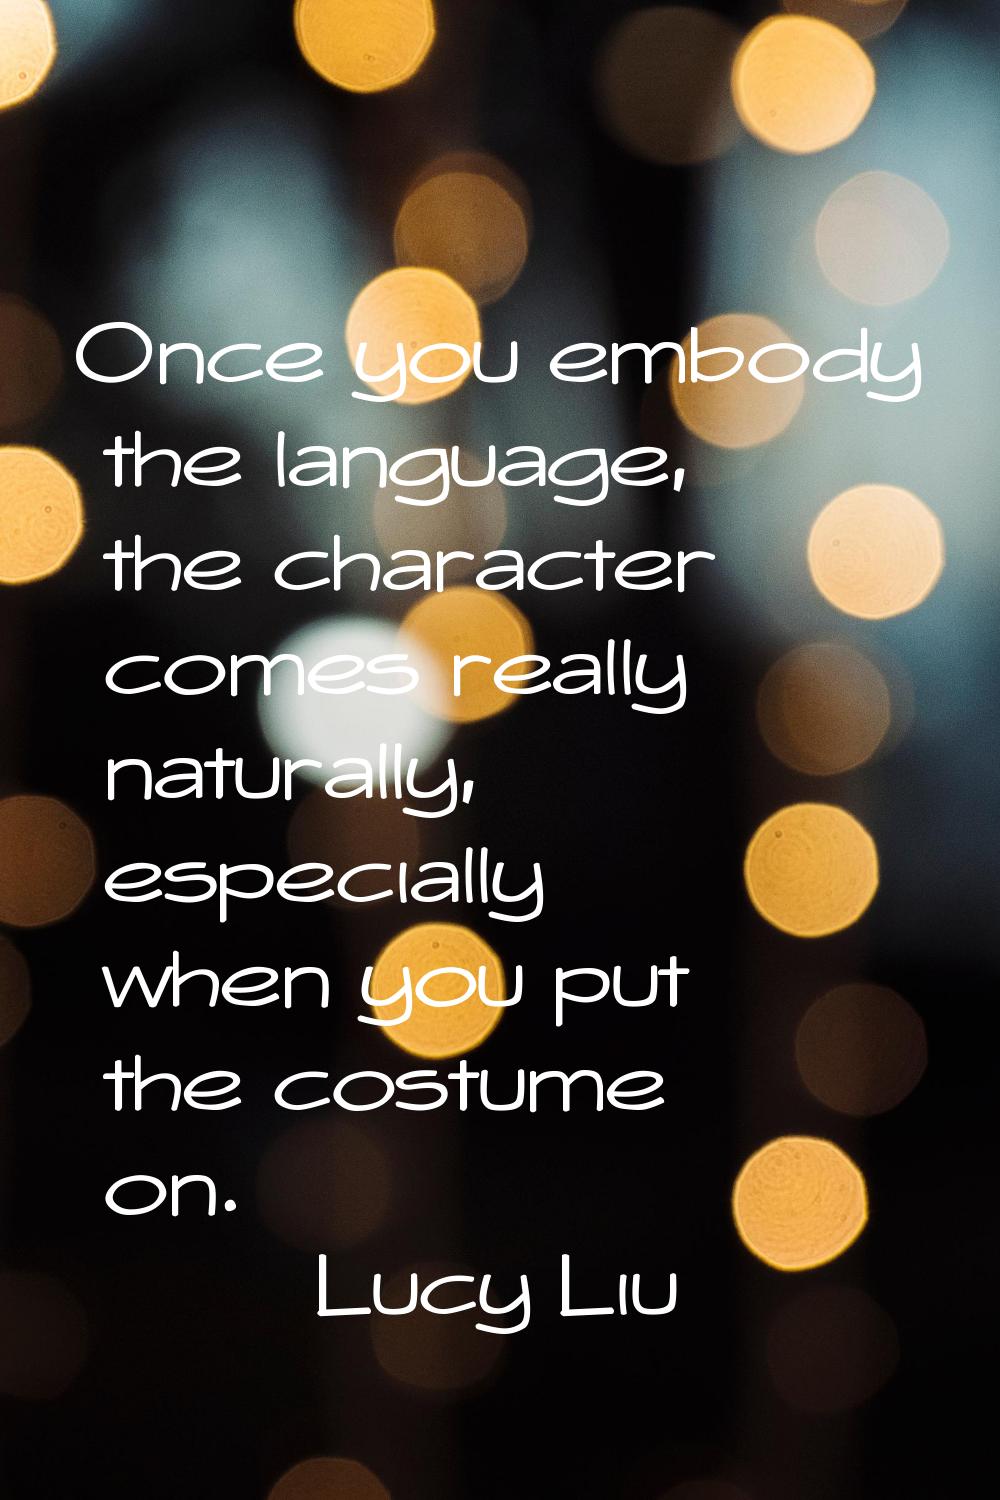 Once you embody the language, the character comes really naturally, especially when you put the cos